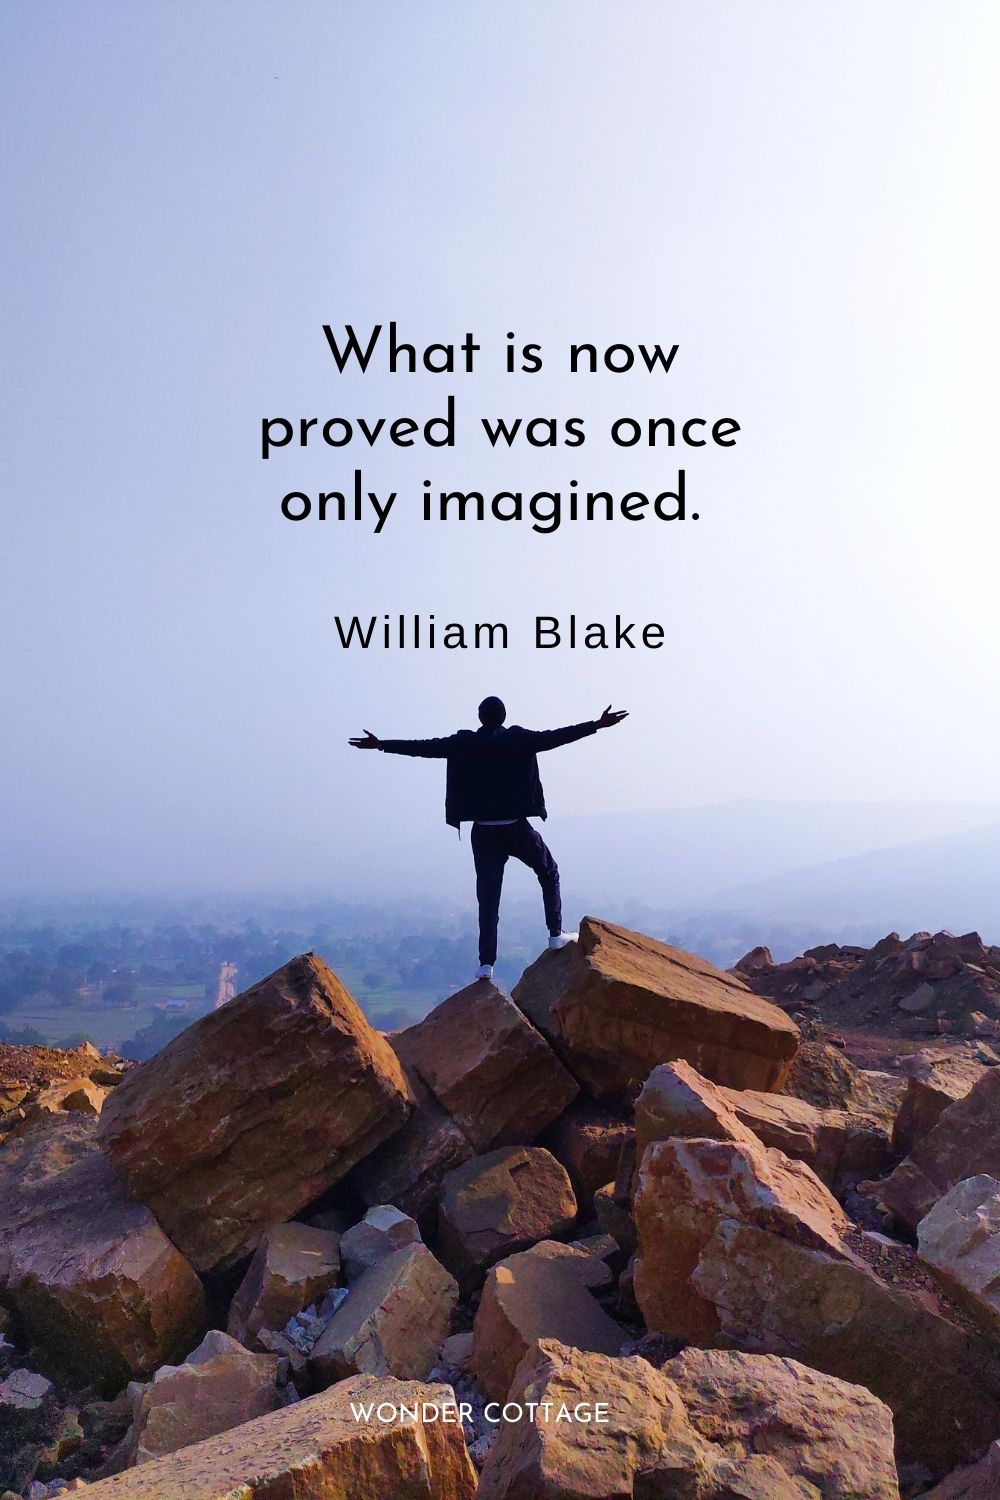 What is now proved was once only imagined. William Blake